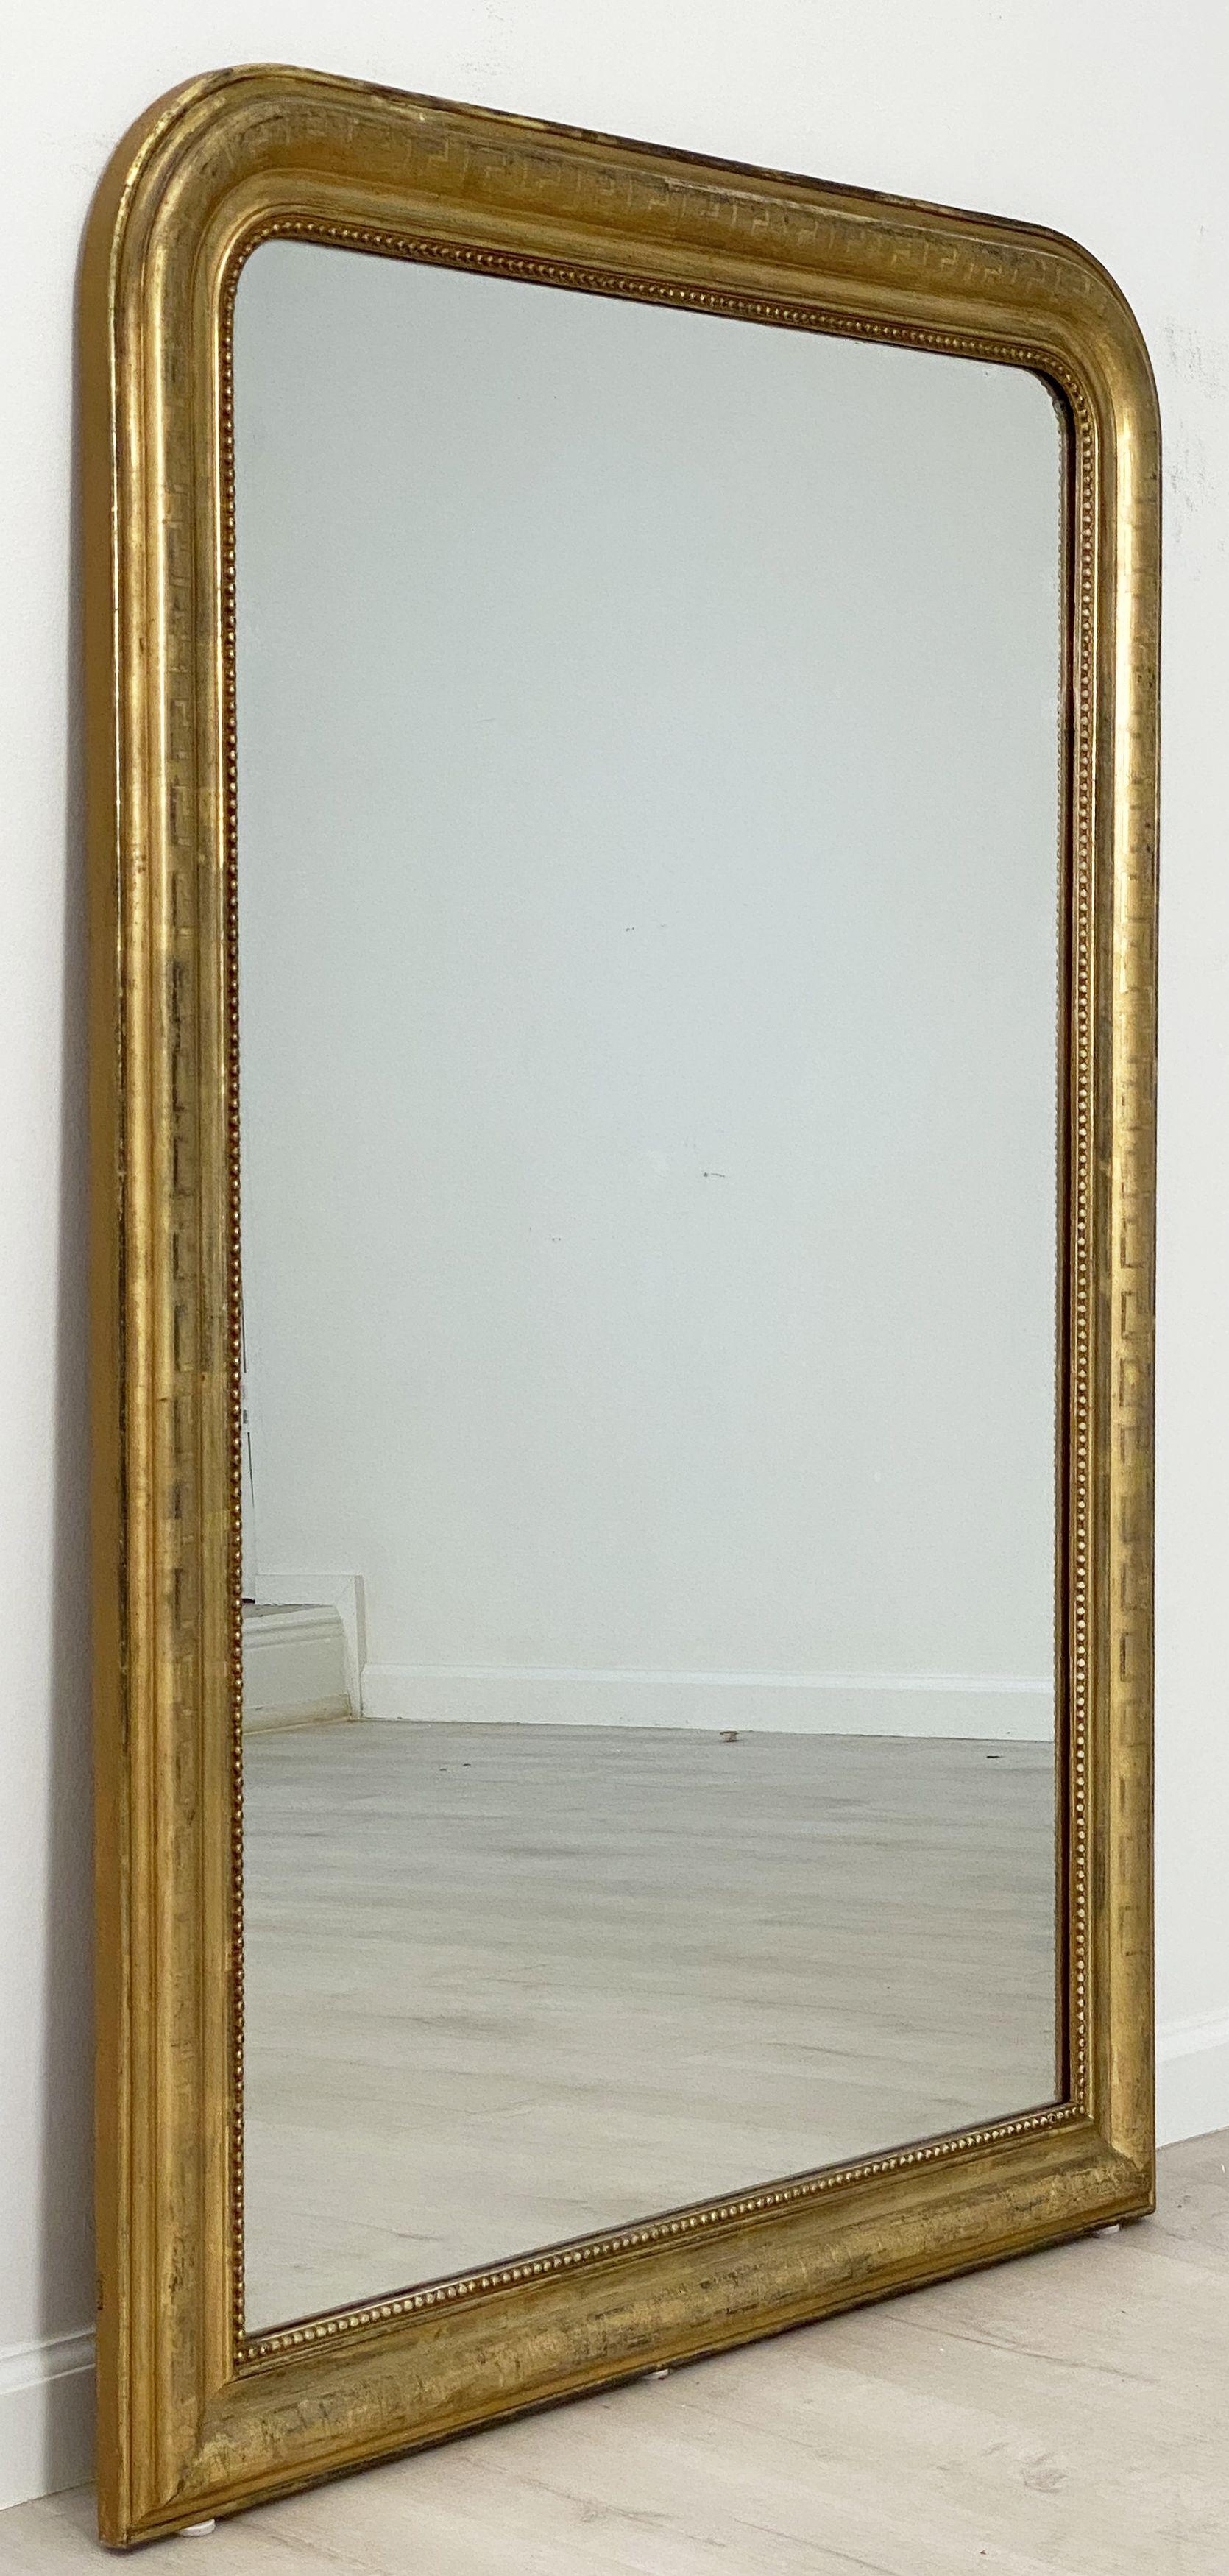 A handsome large Louis Philippe gilt wall mirror featuring a lovely moulded surround and an etched Greek Key design showing through gold-leaf.
With original mirrored glass in great condition.

Dimensions: H 54 inches x W 38 1/2 inches

Other